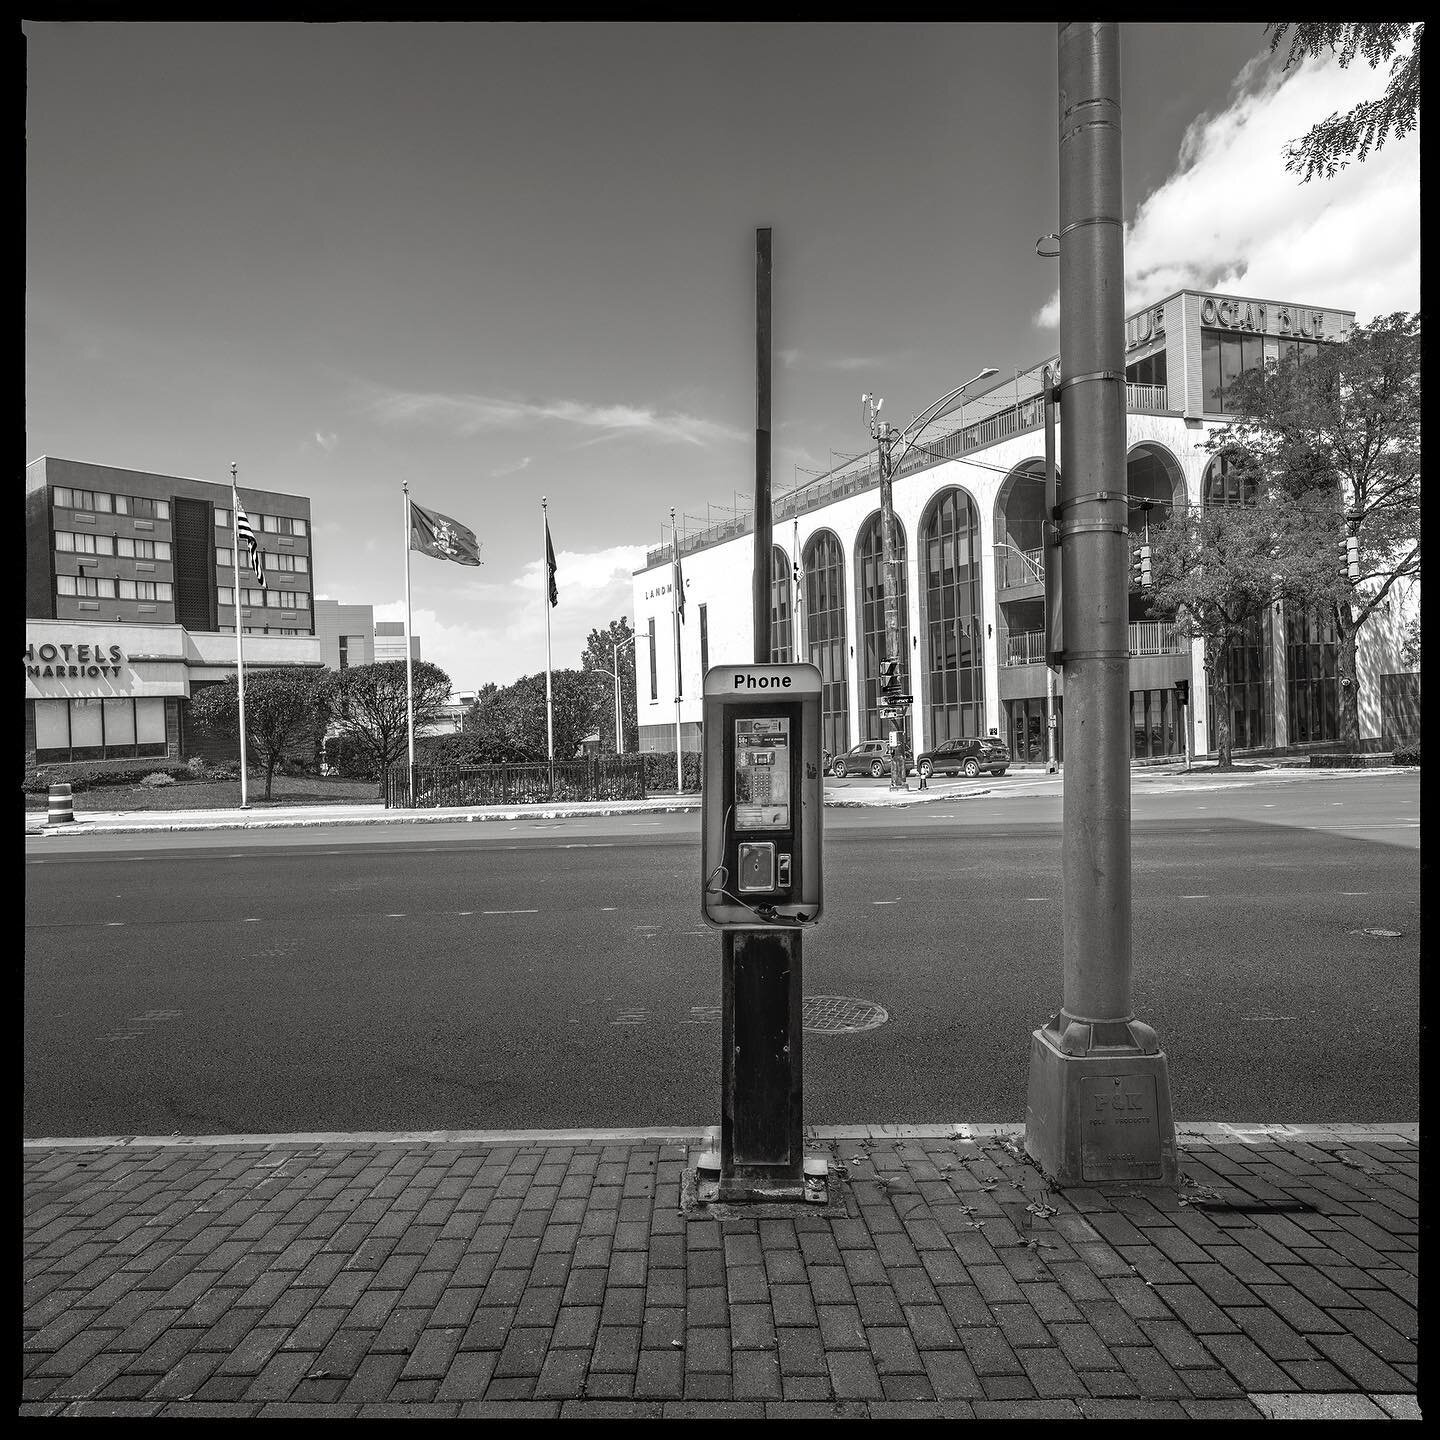 Unknown Number- Grace Church, 6 Elizabeth St, Utica, NY 13501

A trip to Utica, NY yielded a few payphones for the series &ldquo;Life-Lines Throughout the United States.&rdquo; 

Does this make you feel homesick @ann_jastrab ?
.
.
.
.

#lifelinesthro